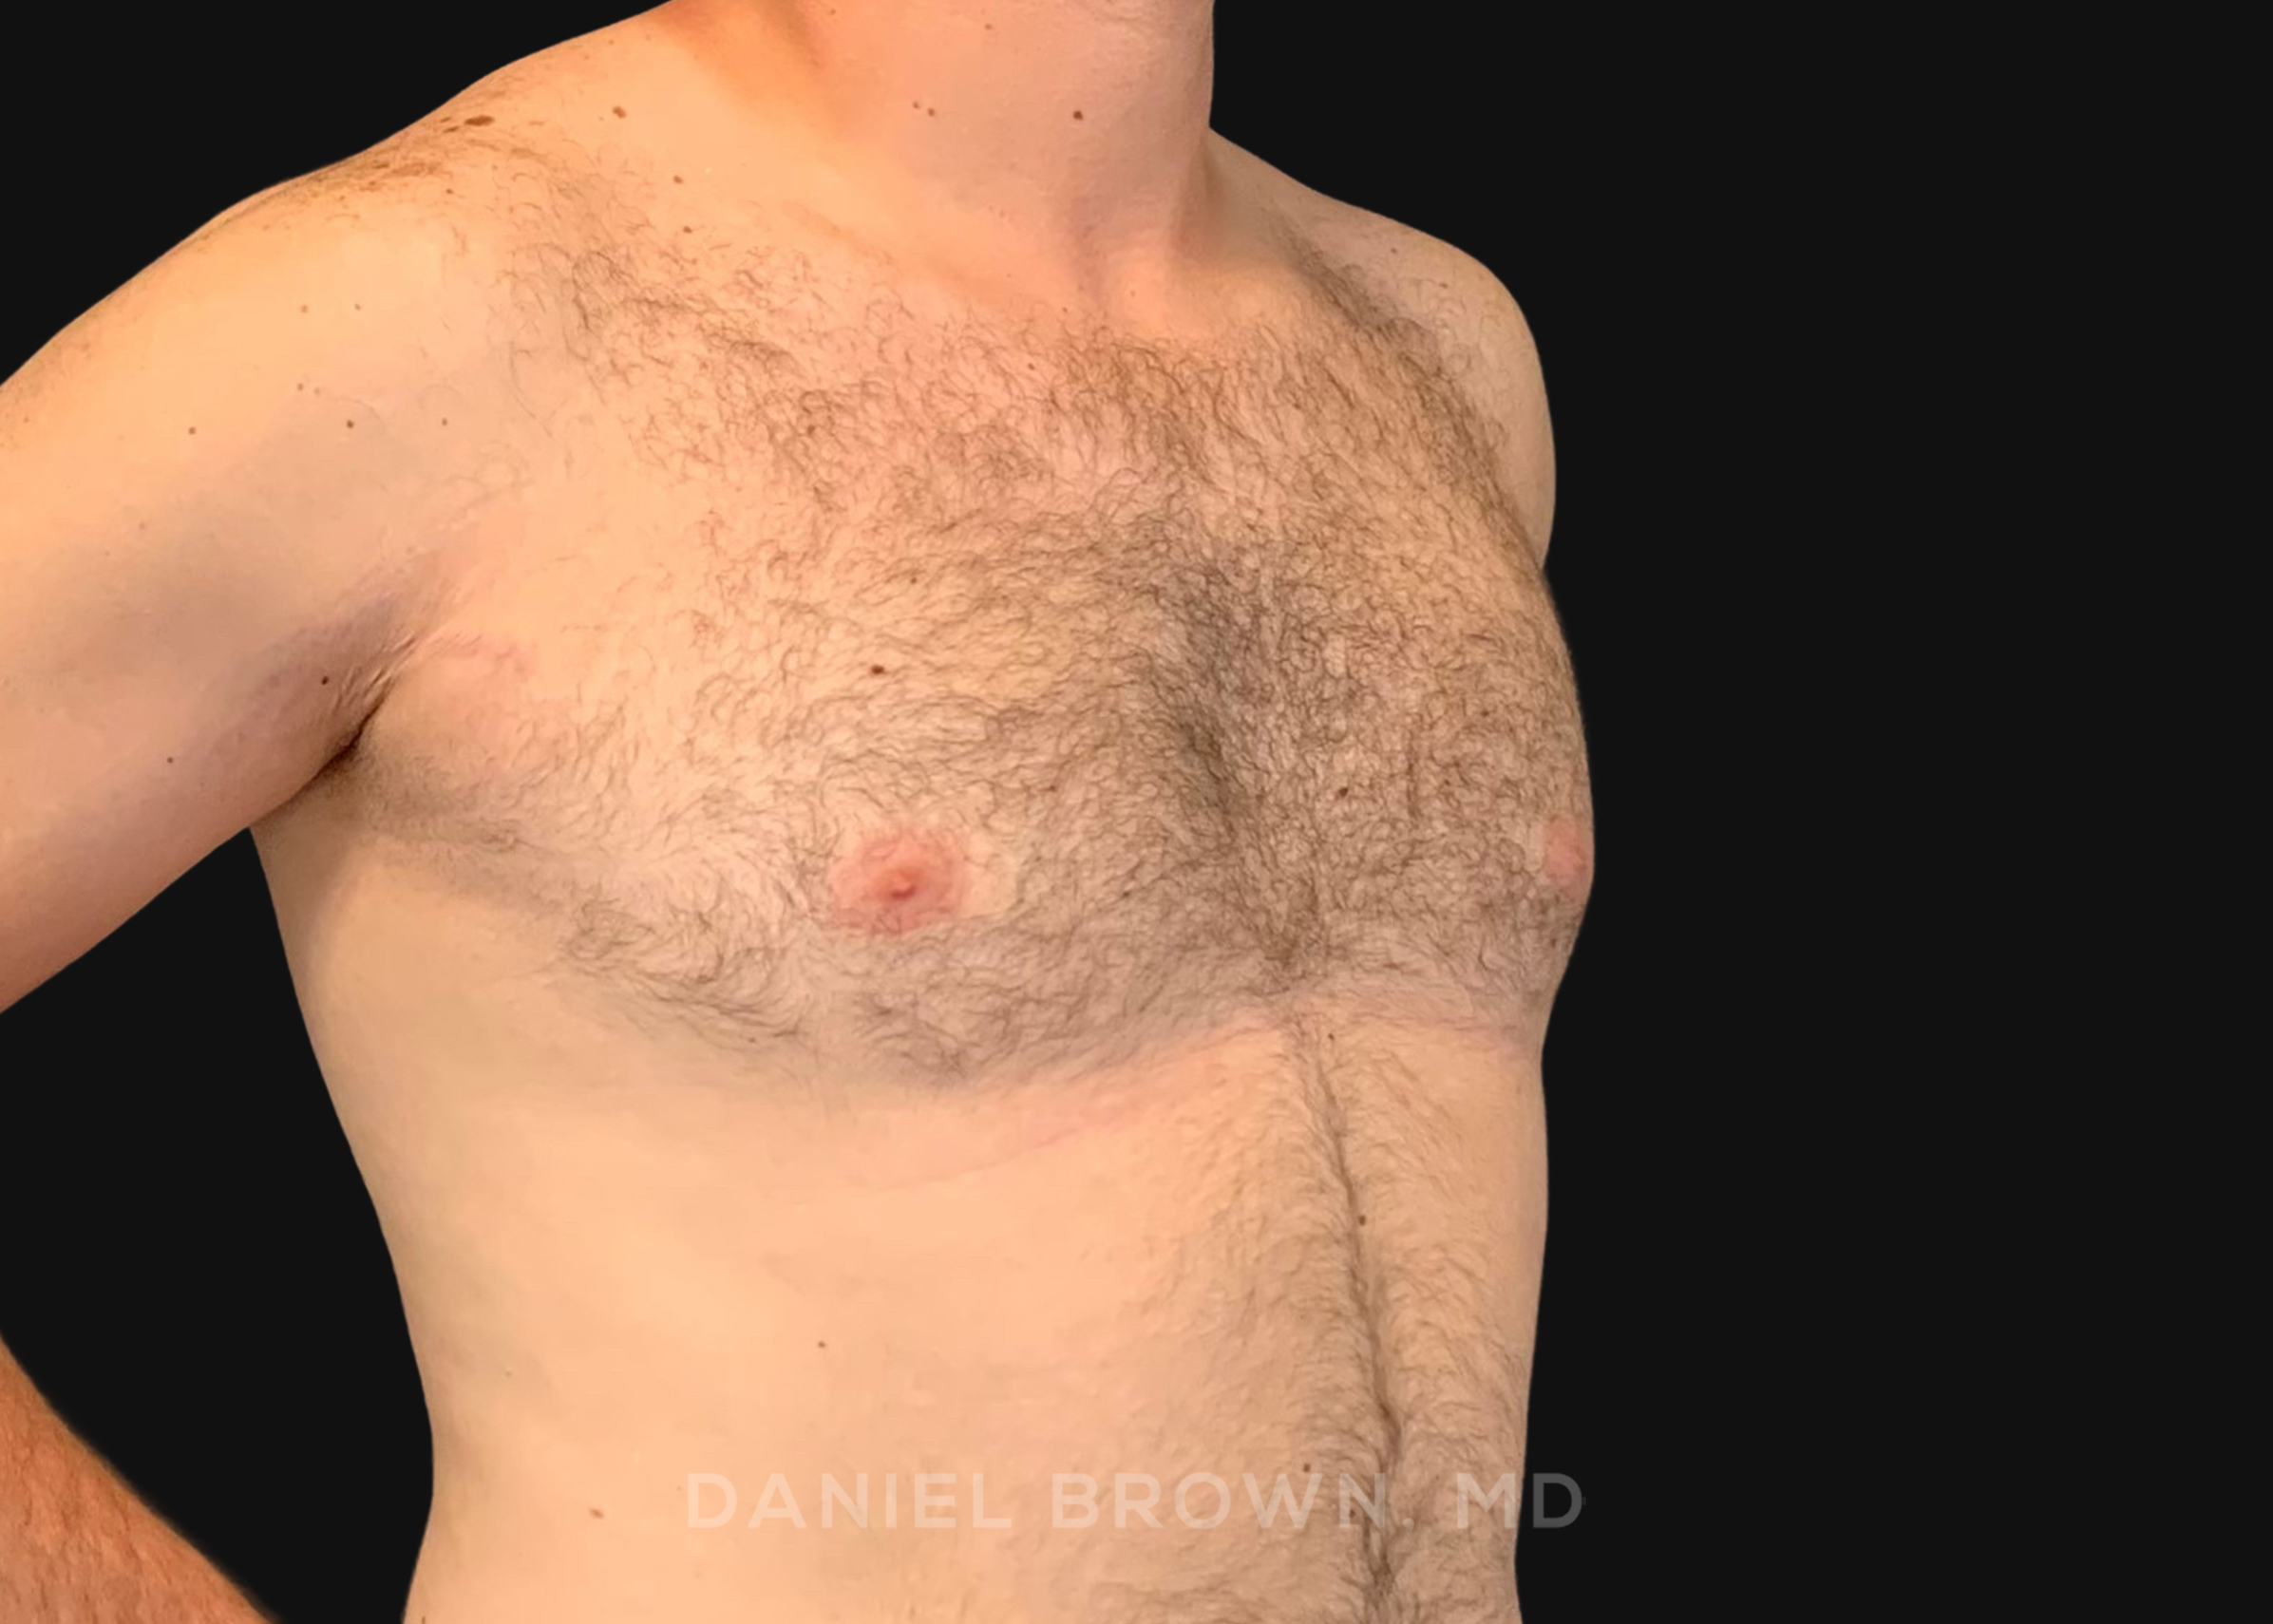 Male Breast Reduction Patient Photo - Case 2746 - after view